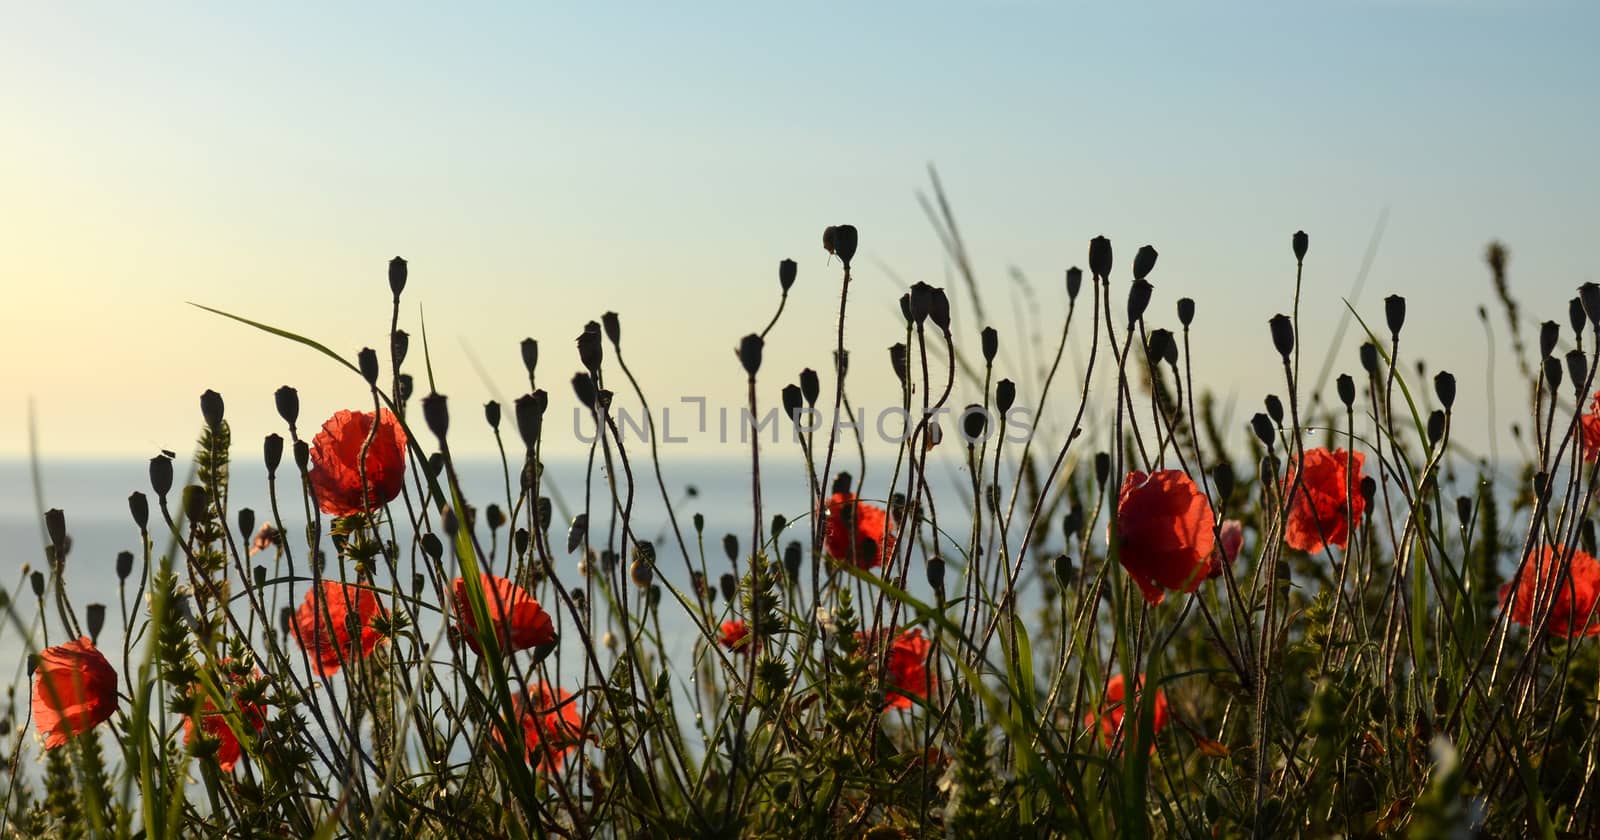 Red poppies on the shore of the sea by hibrida13